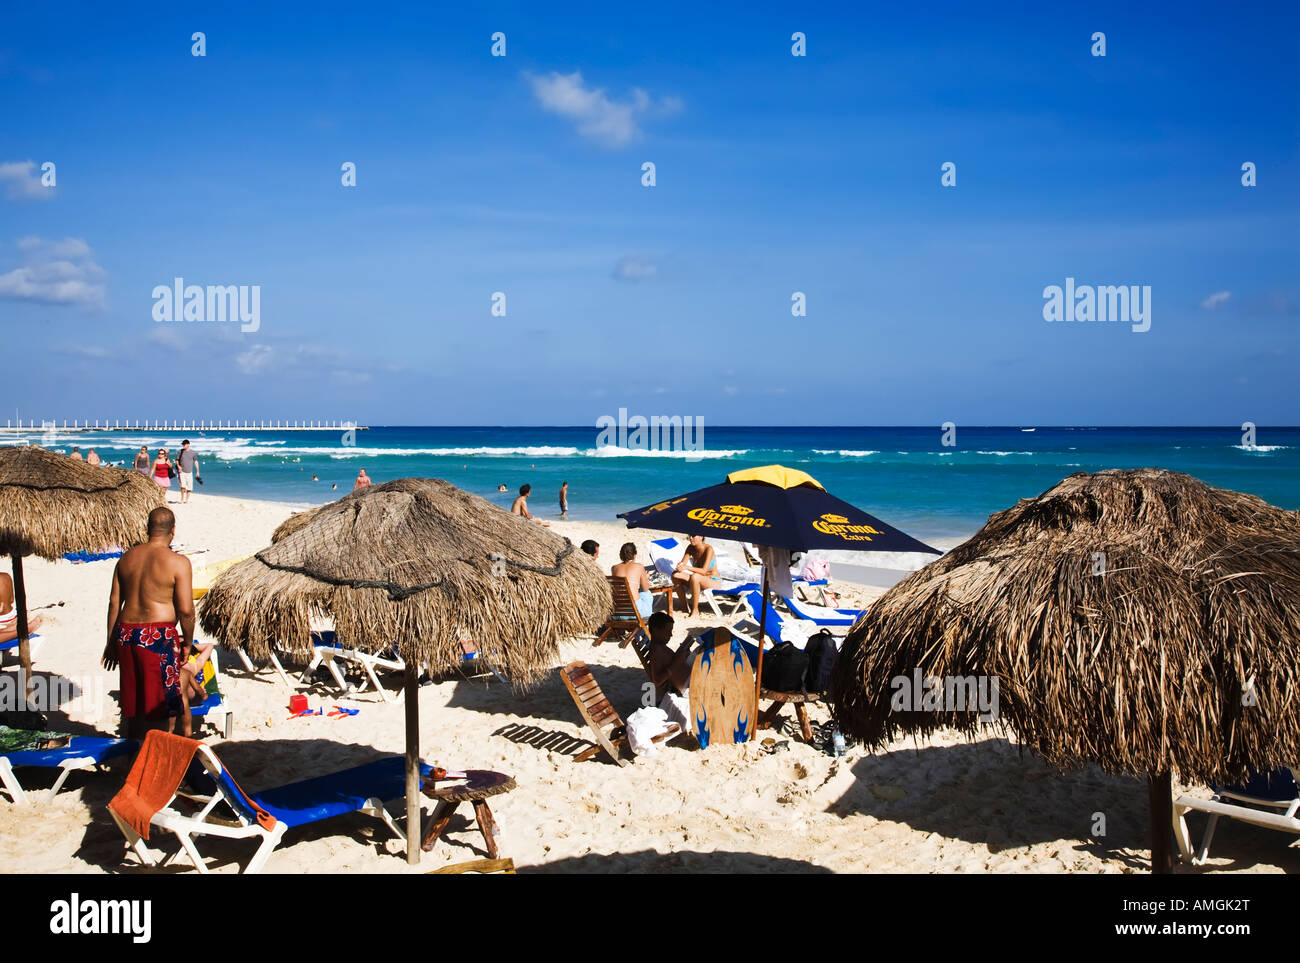 The turquoise waters and white sand beaches of Playa Del Carmen on the Yucatan Peninsula in Quintana Roo Mexico Stock Photo